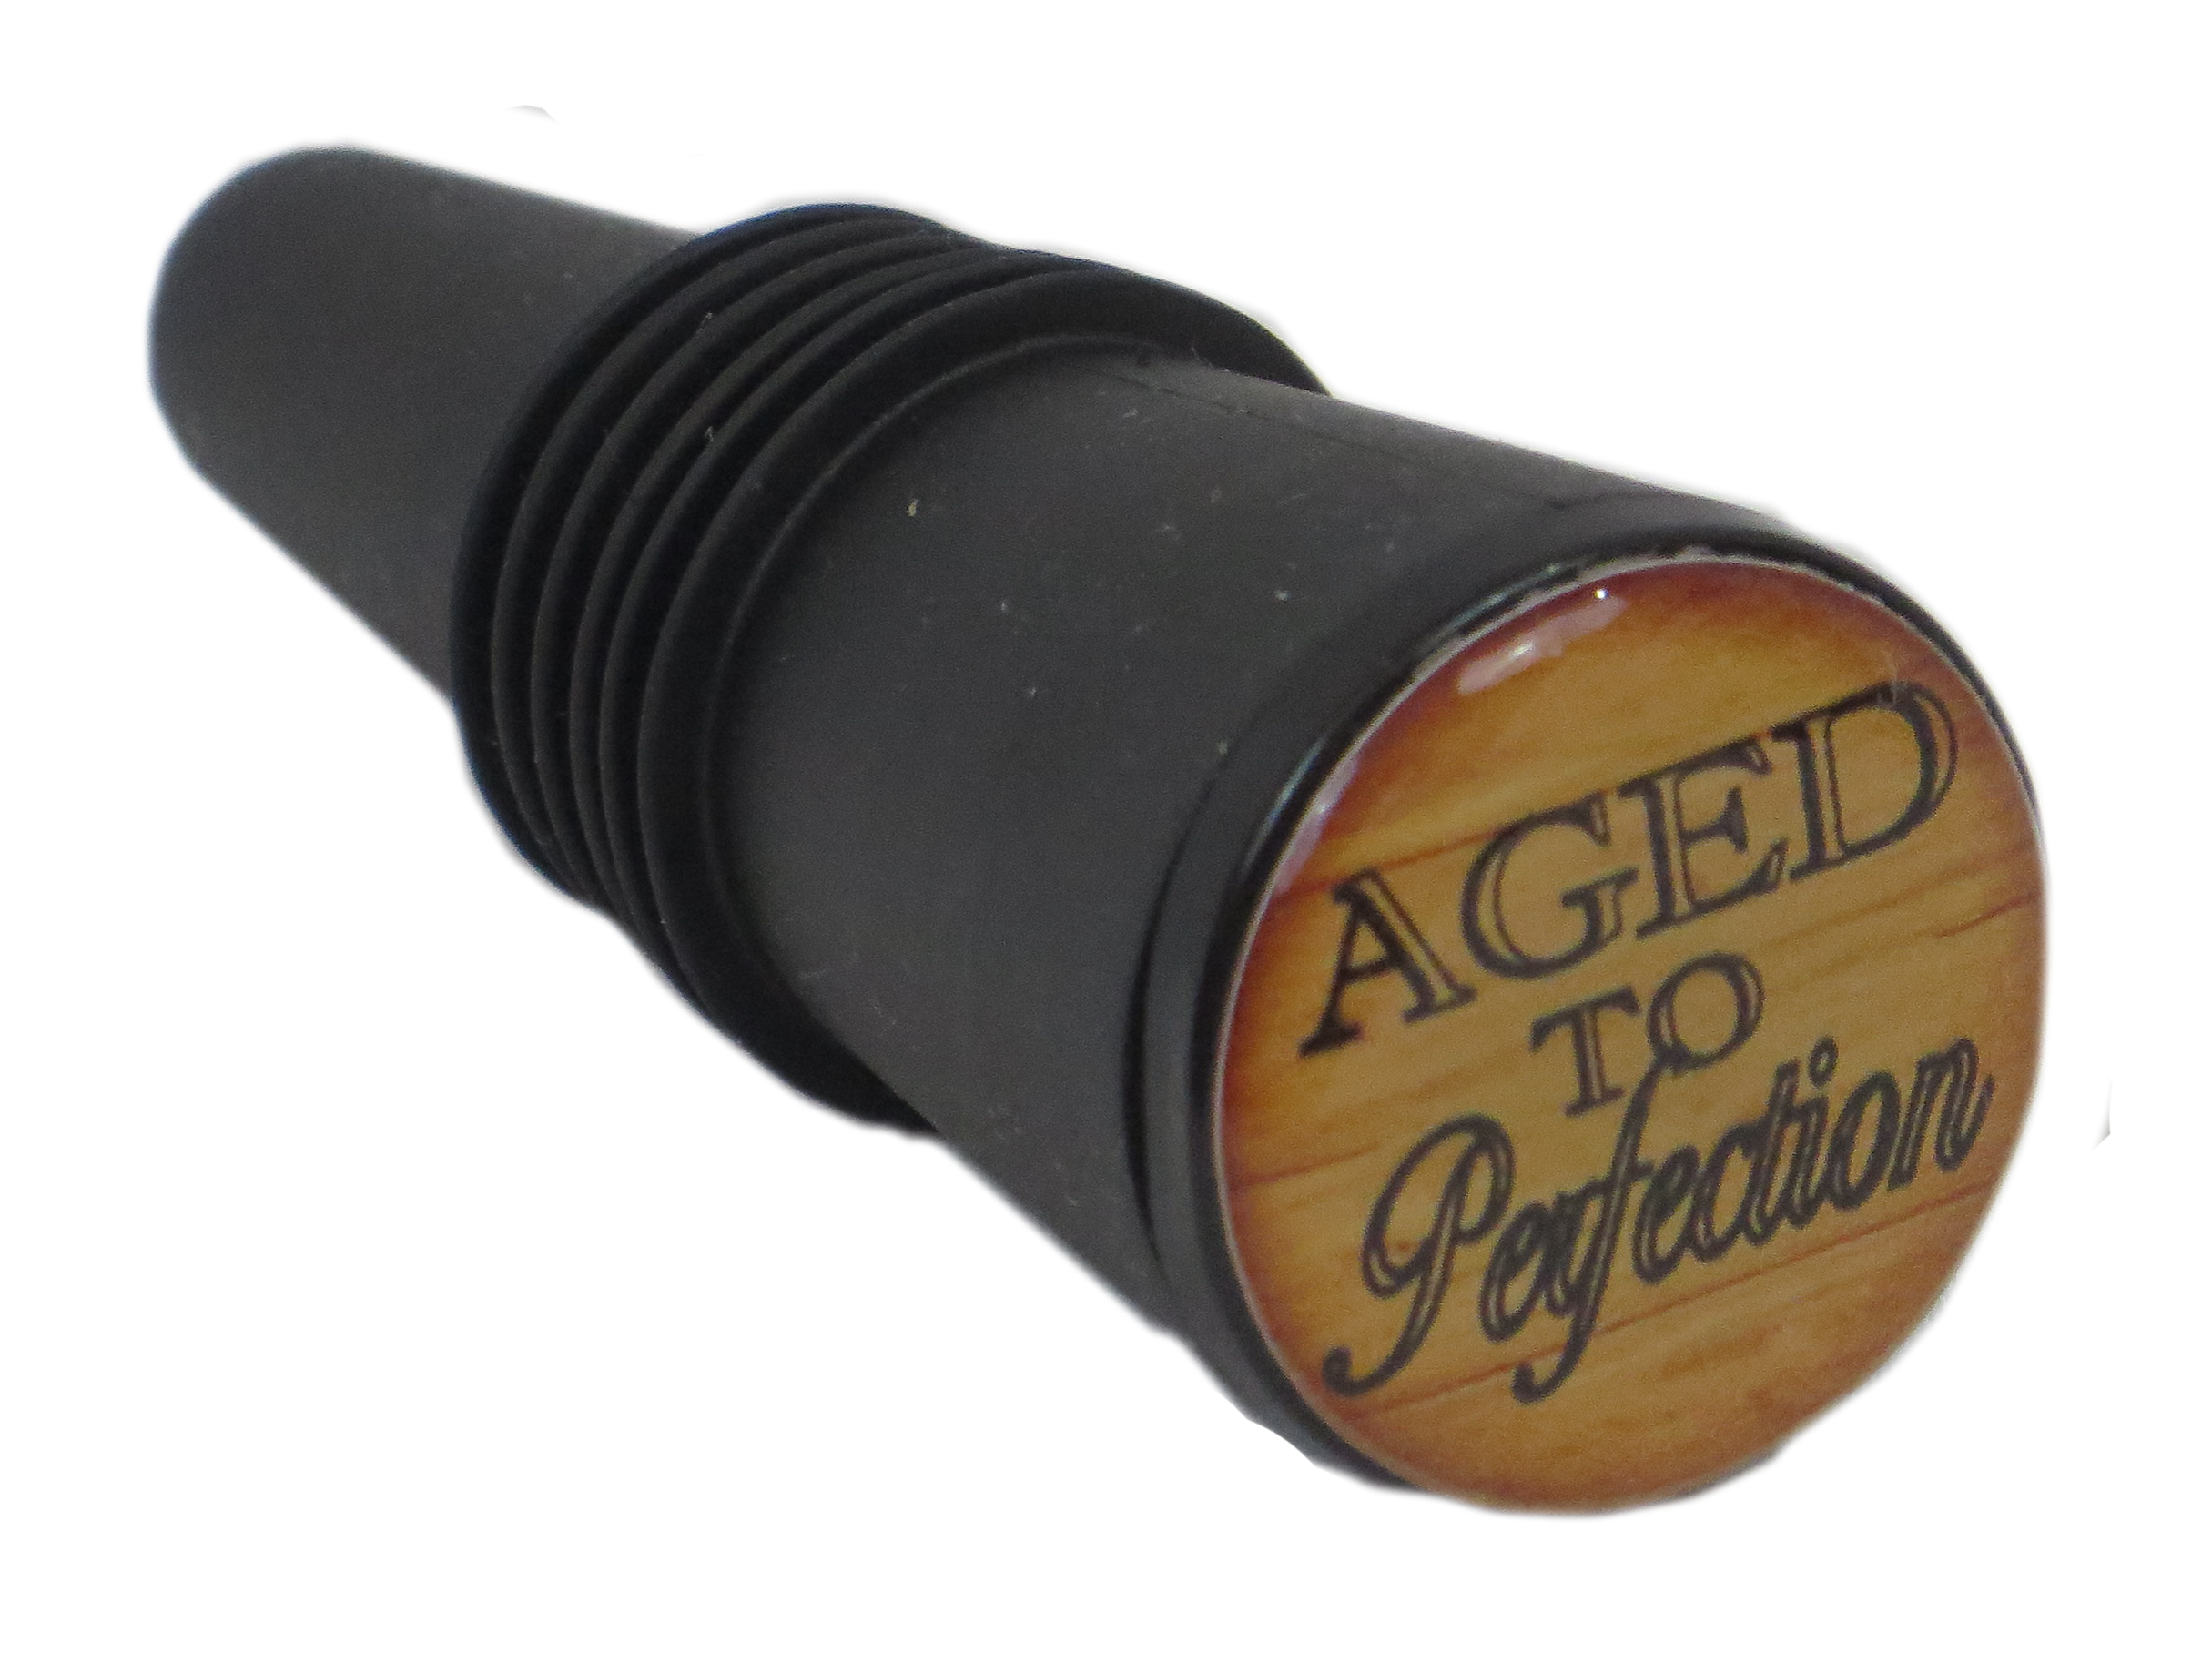 Best of Aged to perfection tube